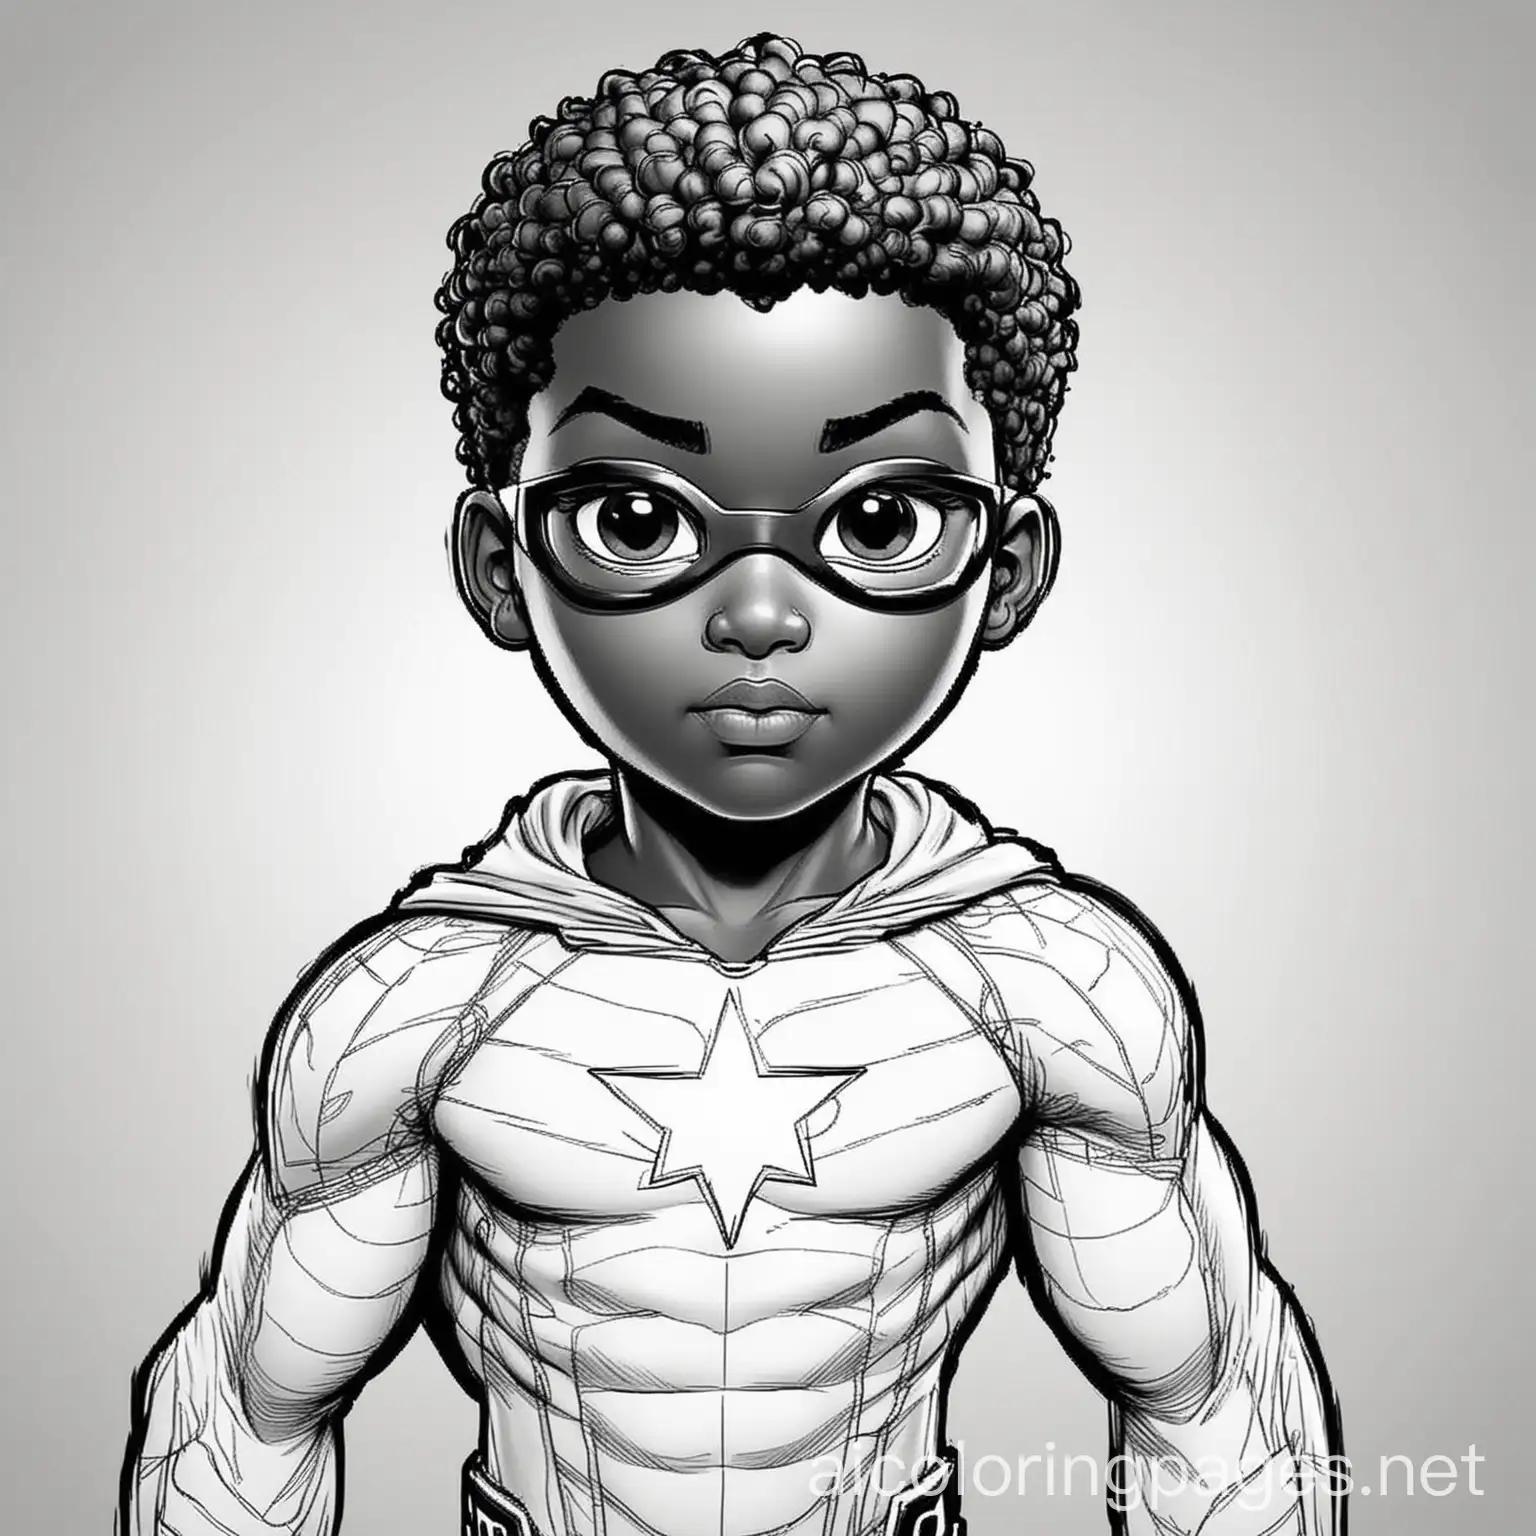 black superhero, Coloring Page, black and white, line art, white background, Simplicity, Ample White Space. The background of the coloring page is plain white to make it easy for young children to color within the lines. The outlines of all the subjects are easy to distinguish, making it simple for kids to color without too much difficulty